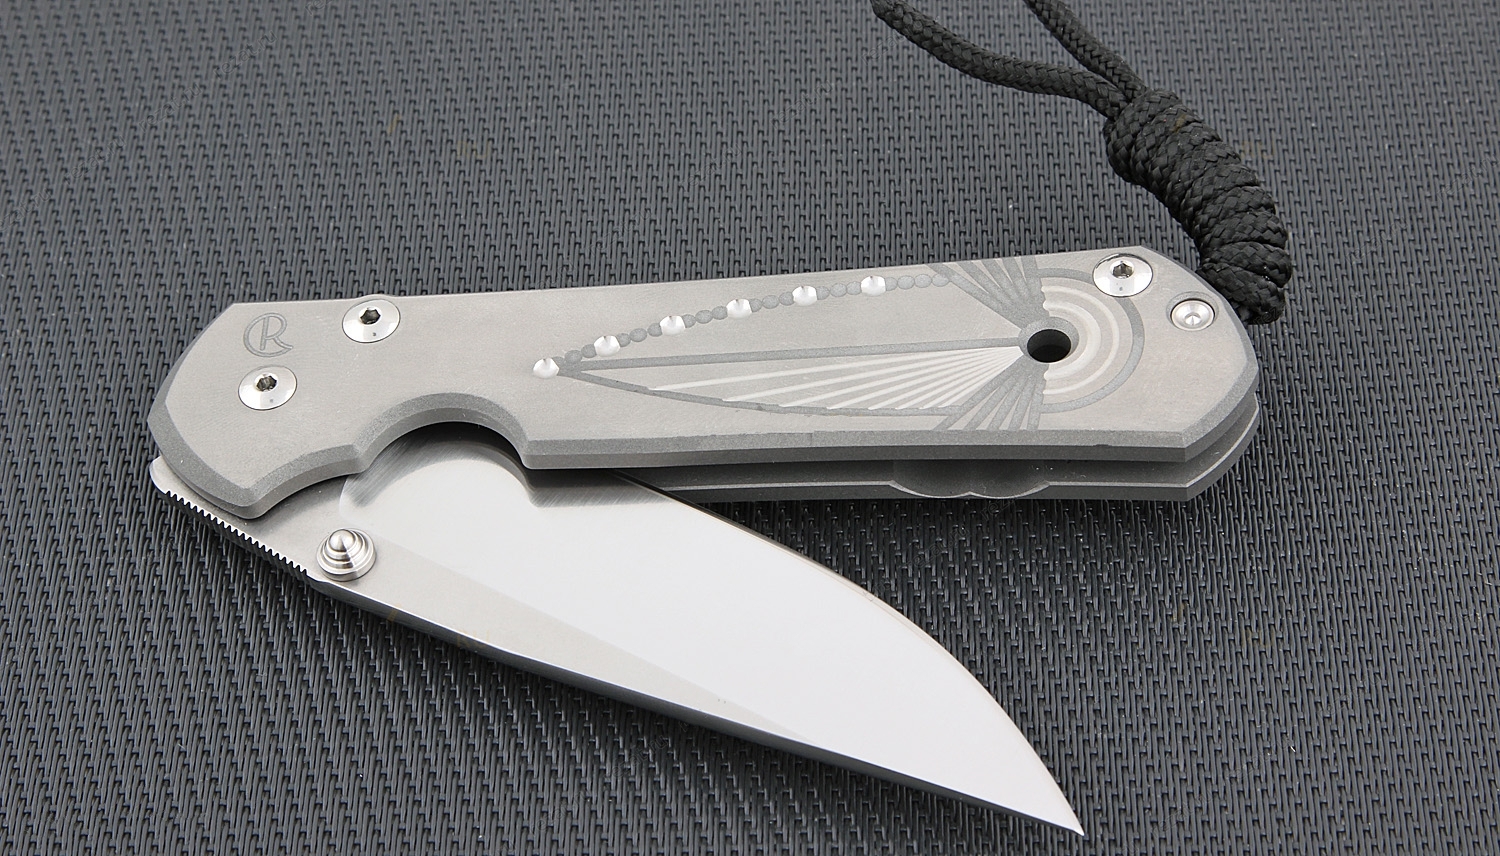   Chris Reeve Large Sebenza 21 Unique Graphics In Reverse Silver Contrast,  CPM-S35VN,  